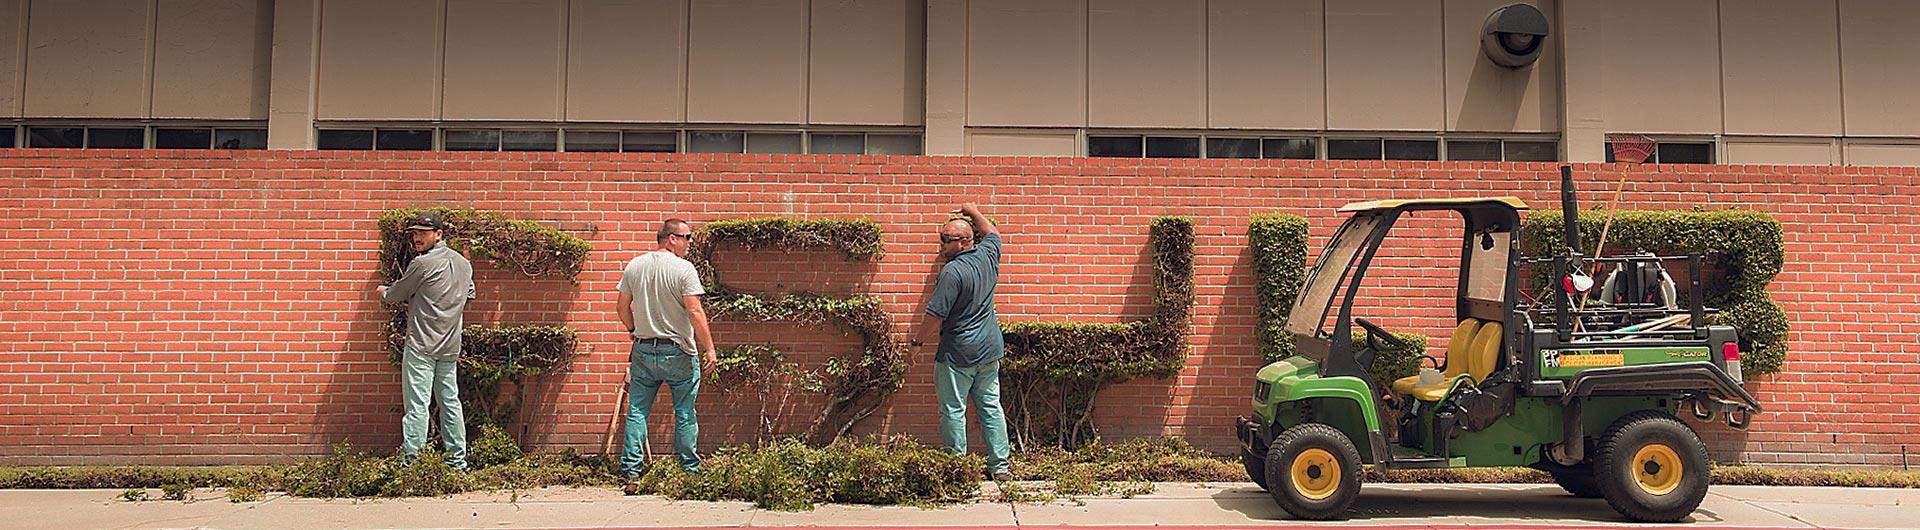 Campus landscape staff working on the C S U L B topiary